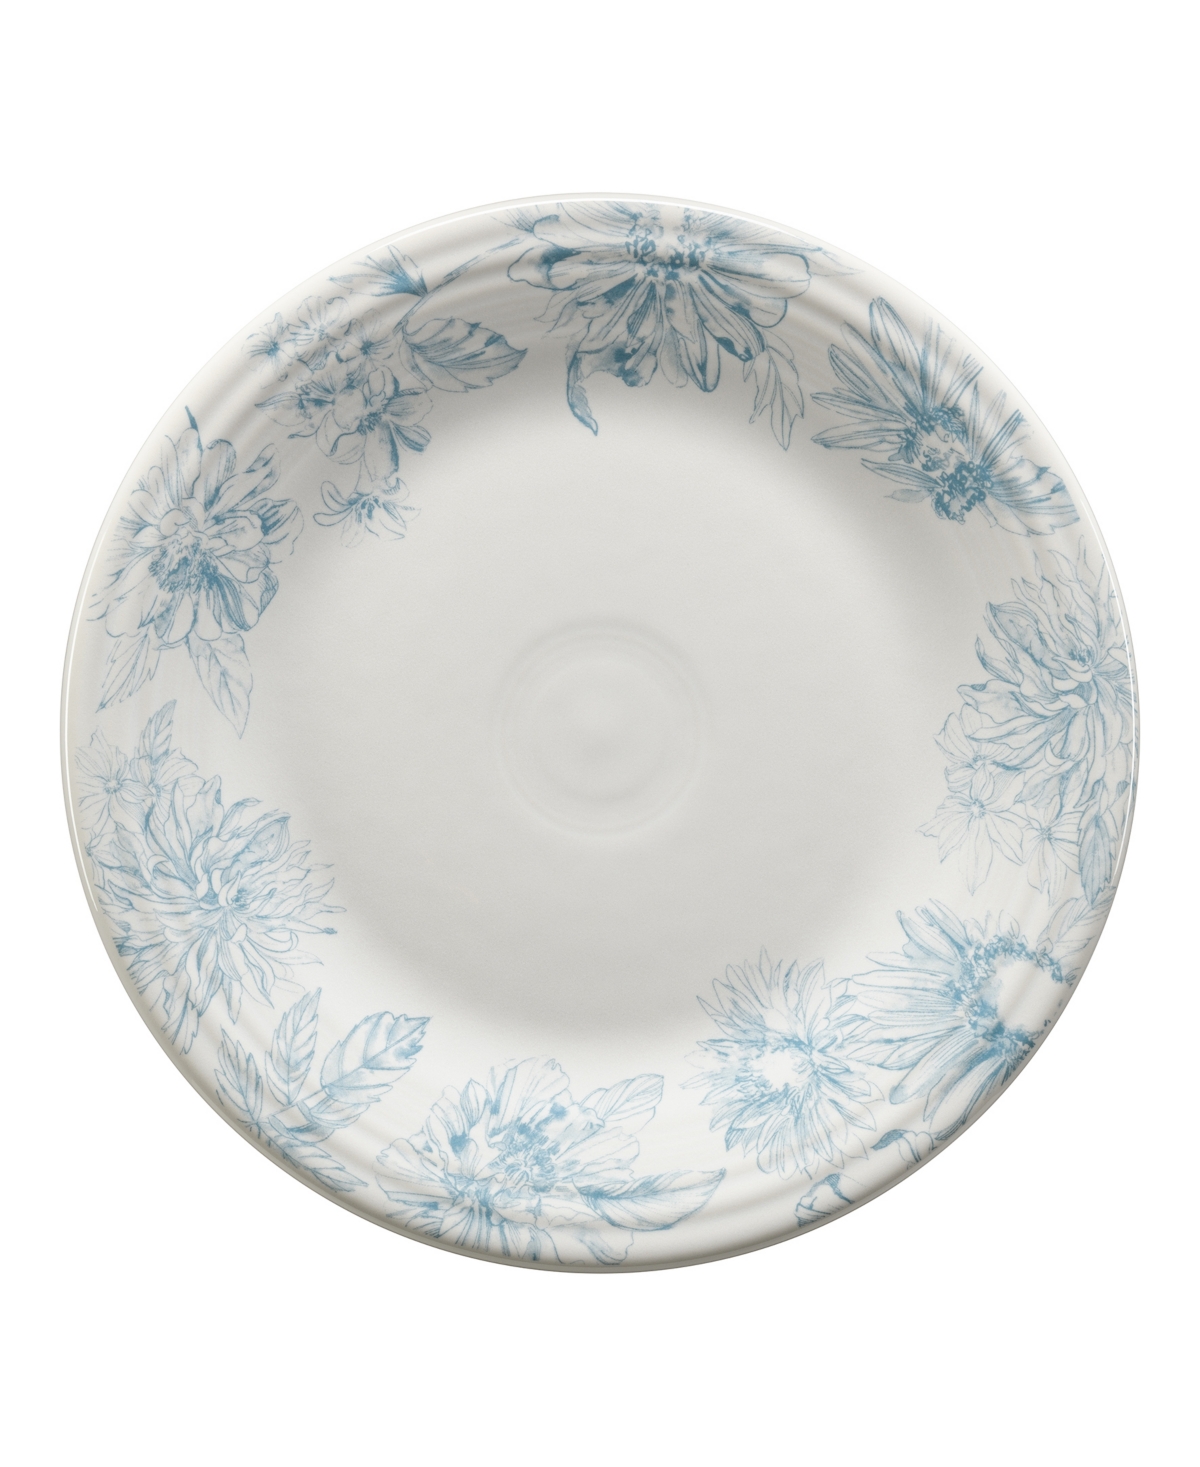 Botanical Floral Classic Dinner Plate - Open White